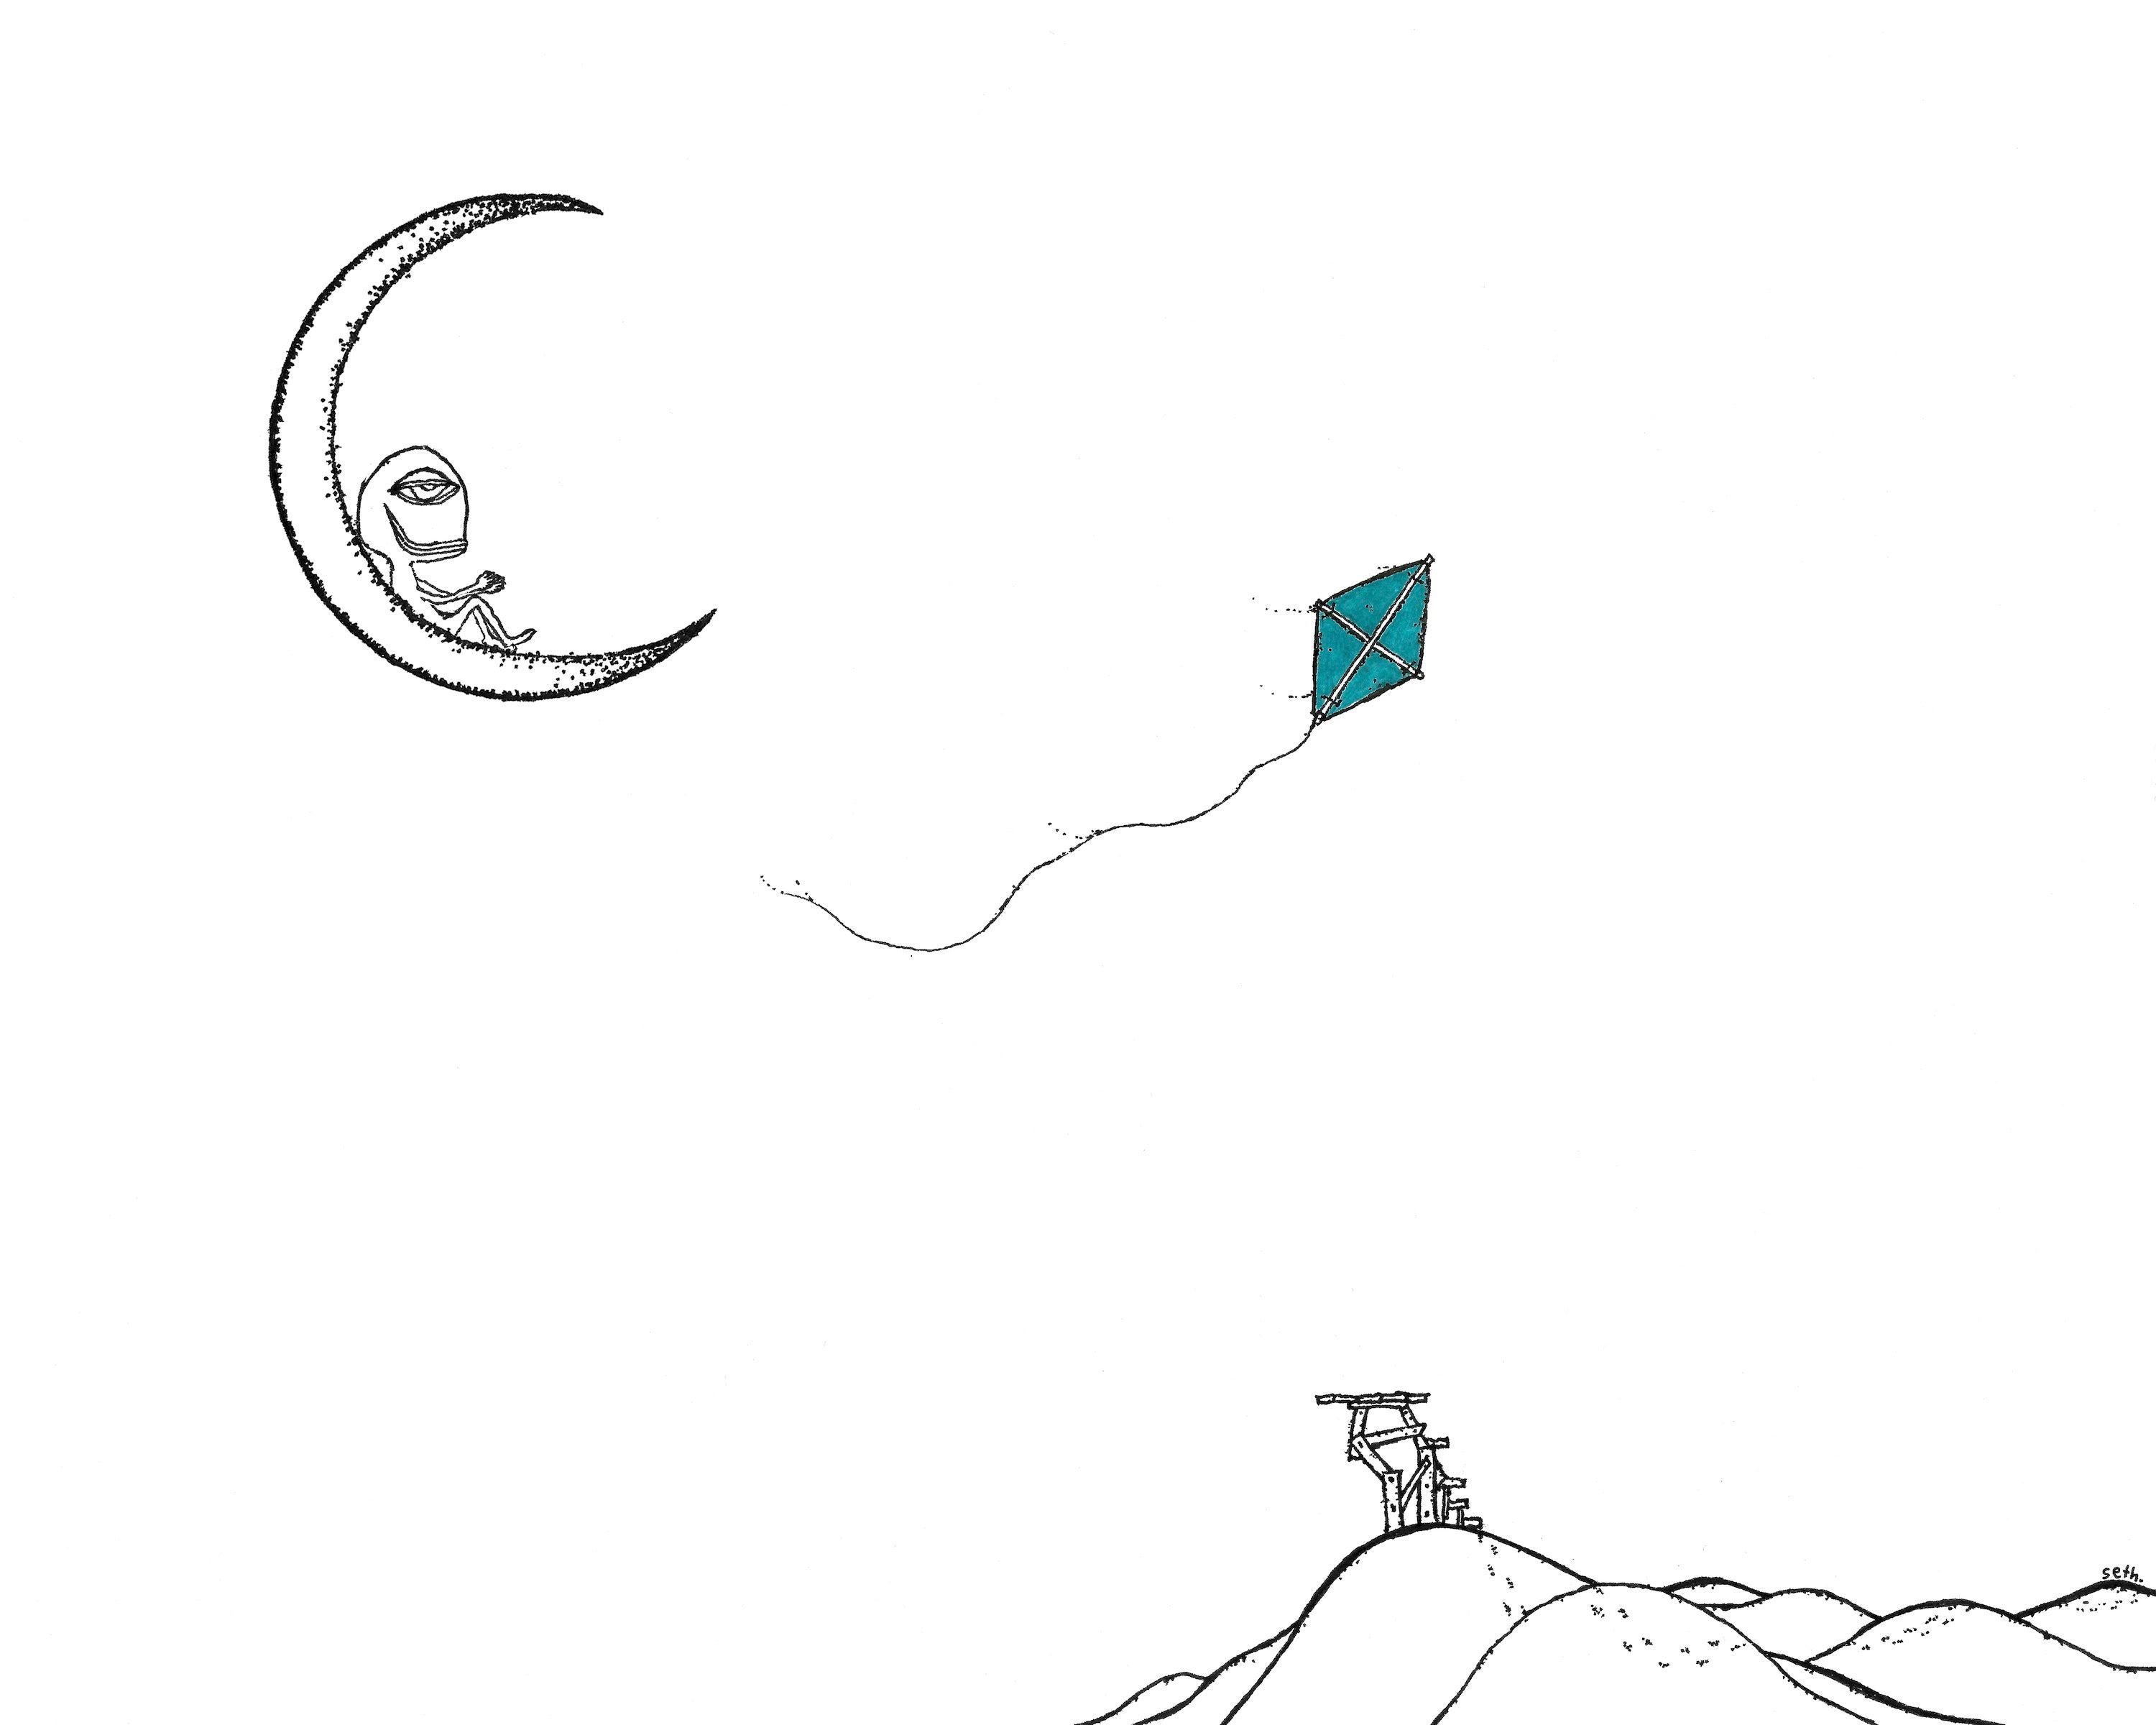 The blue kite and the moon